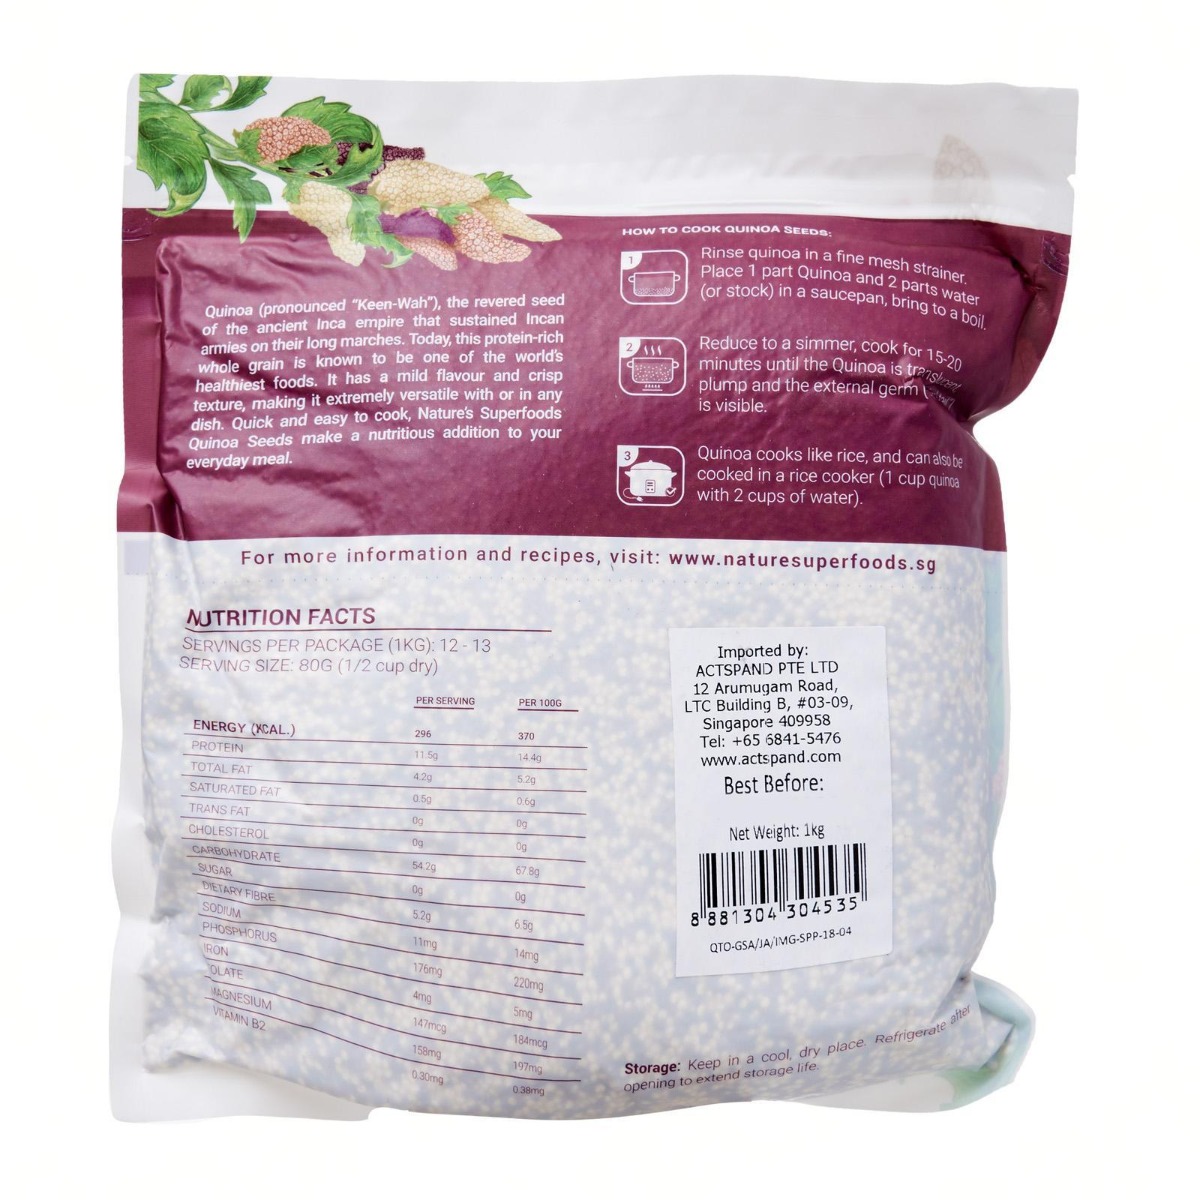 Organic Tricolor Quinoa Seeds -1kg resealable pack back